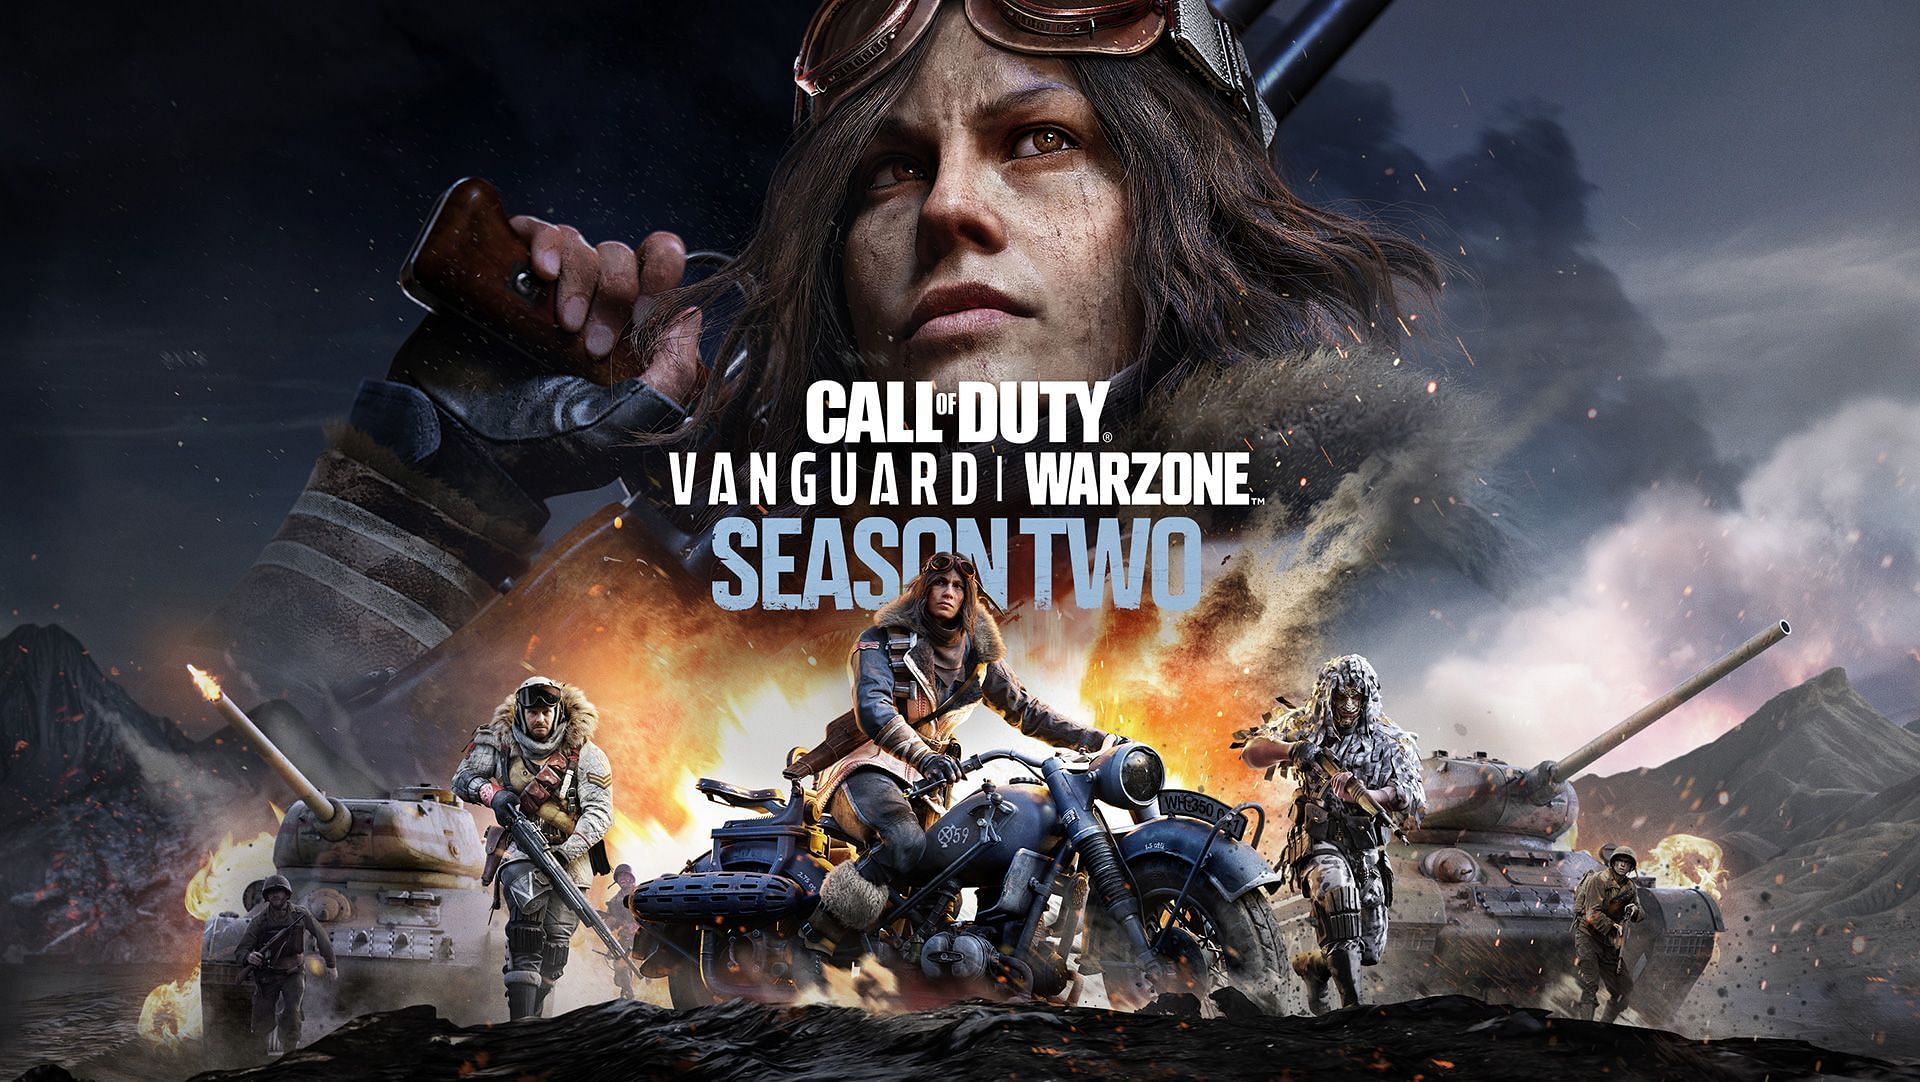 Call of Duty Vanguard and Warzone Season Two Reloaded brings new playlist for the next five weeks (Image by Activision)